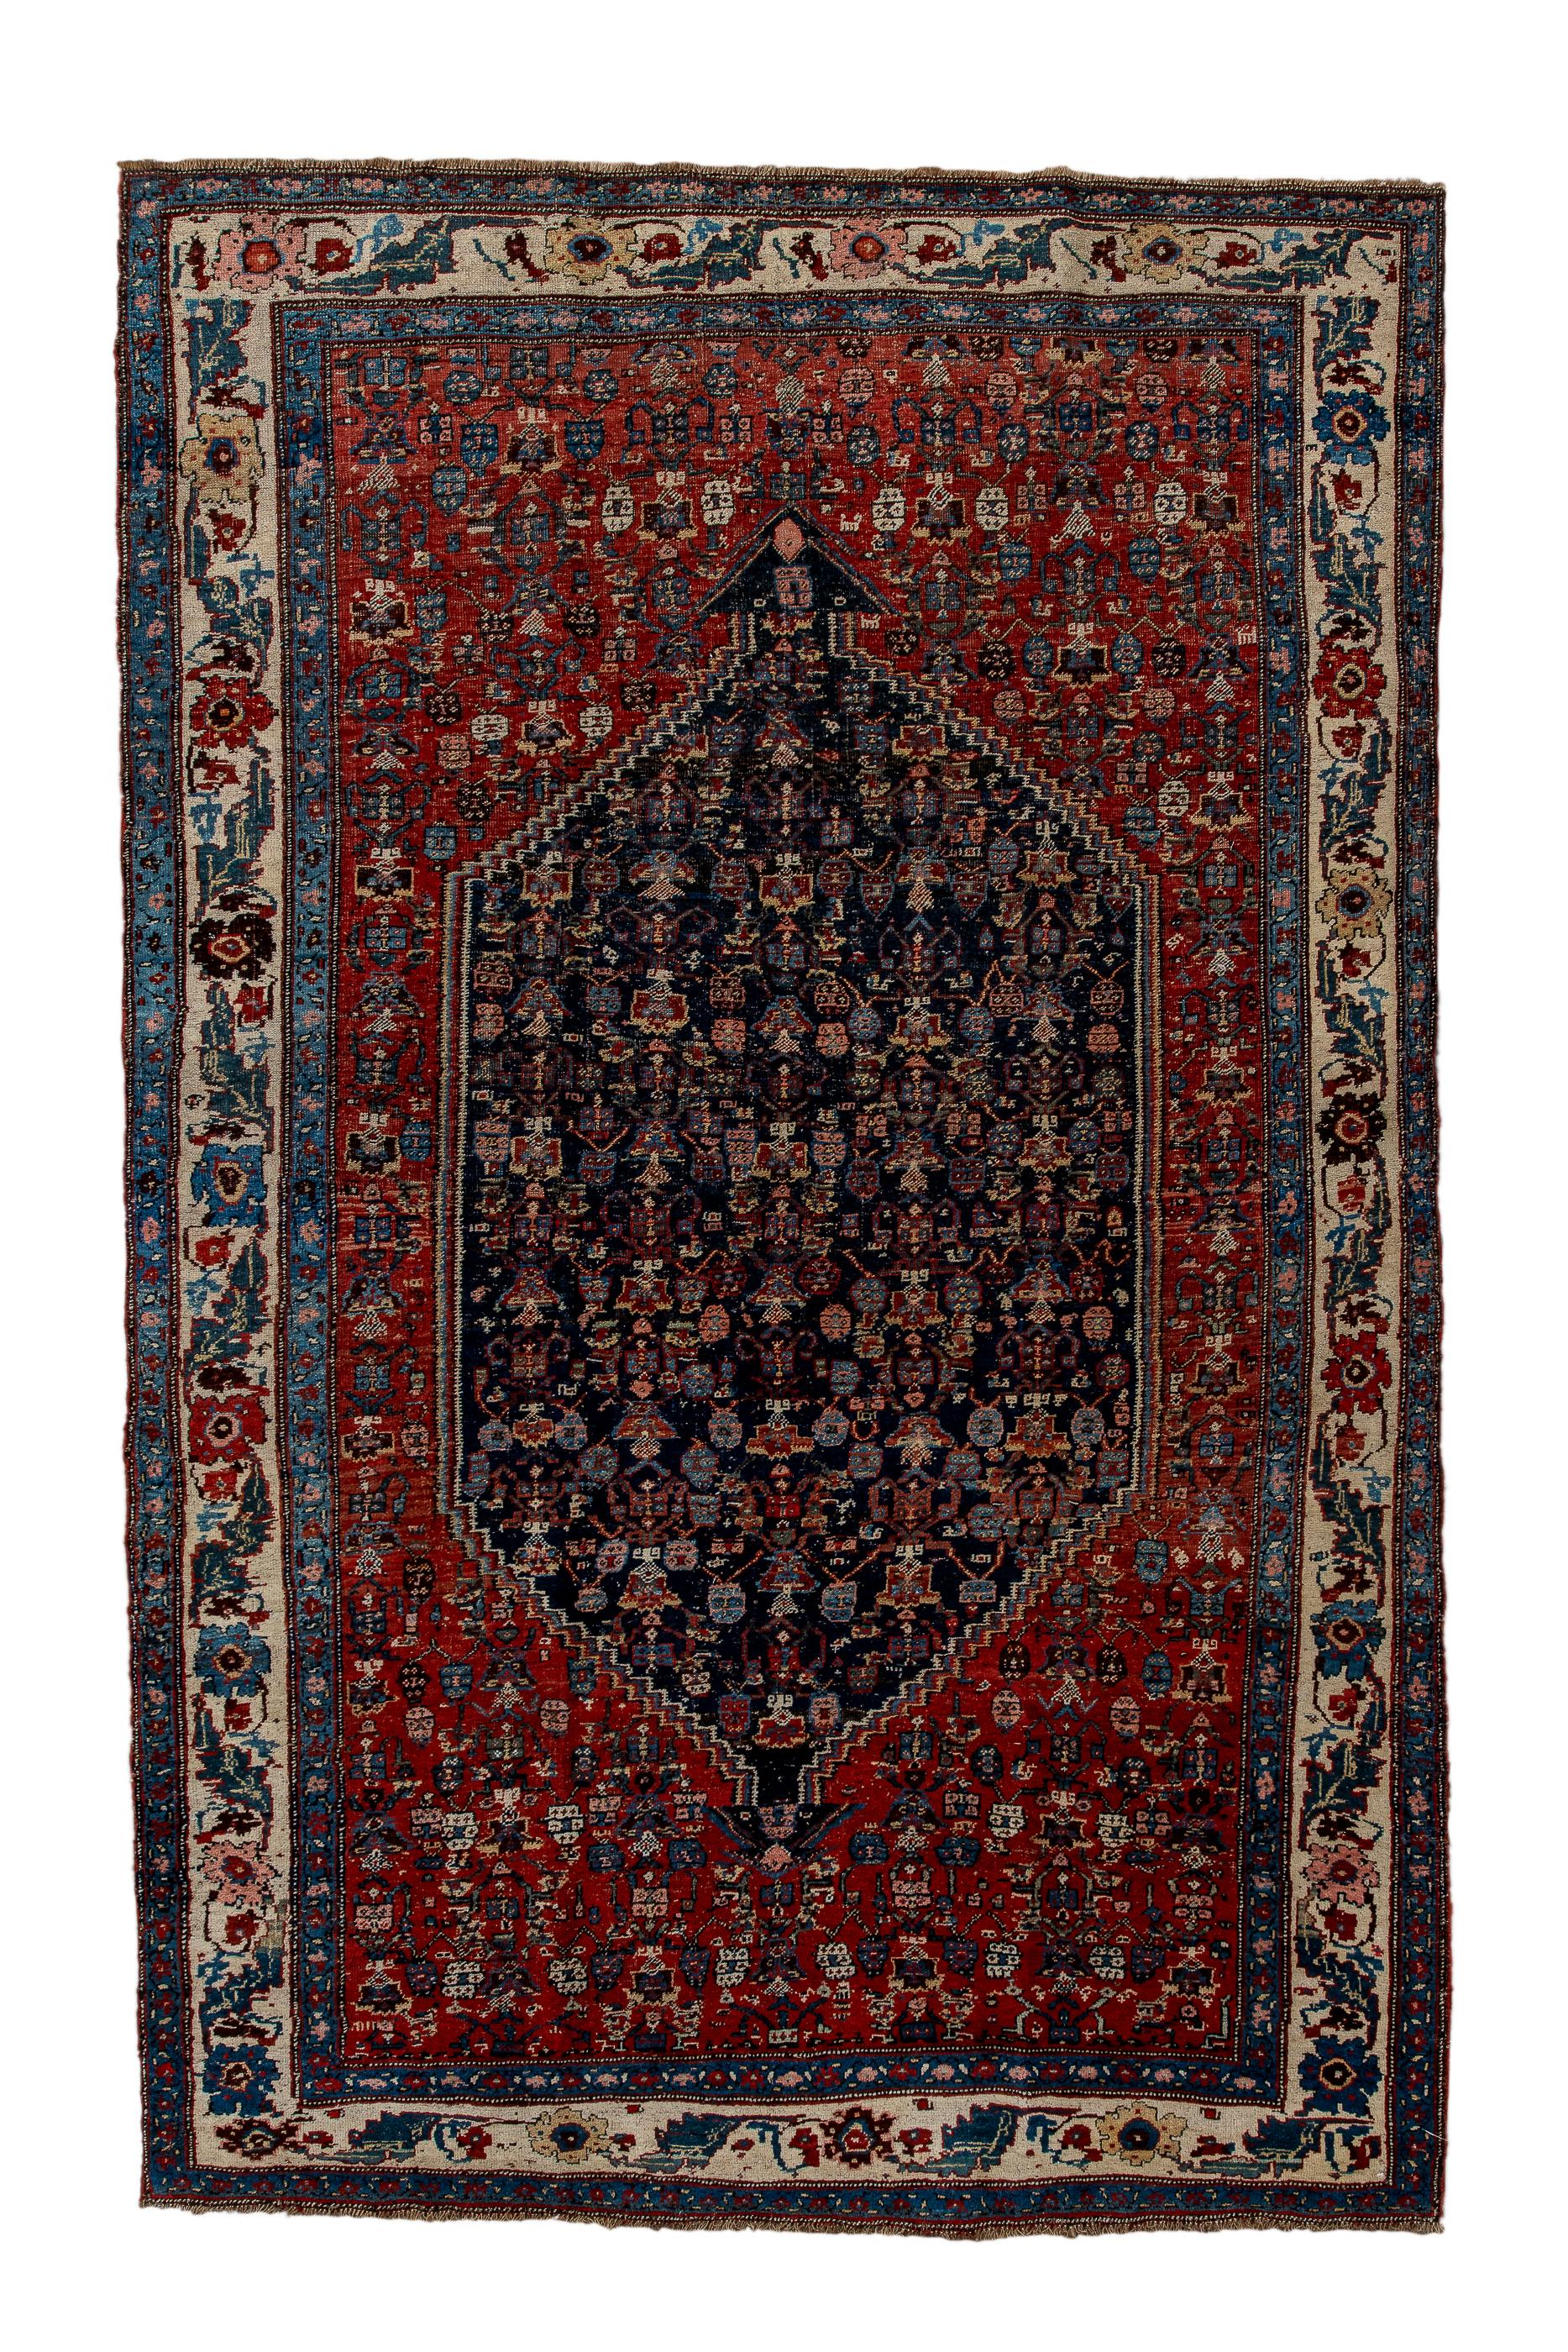 Bidjar Kurdish city rugs are always robust and solid, and this one with a red field of small flowers is no exception. The navy subfield is stepped on the slanted ends and displays a rough variant of the allover Herati design. The ecru main border